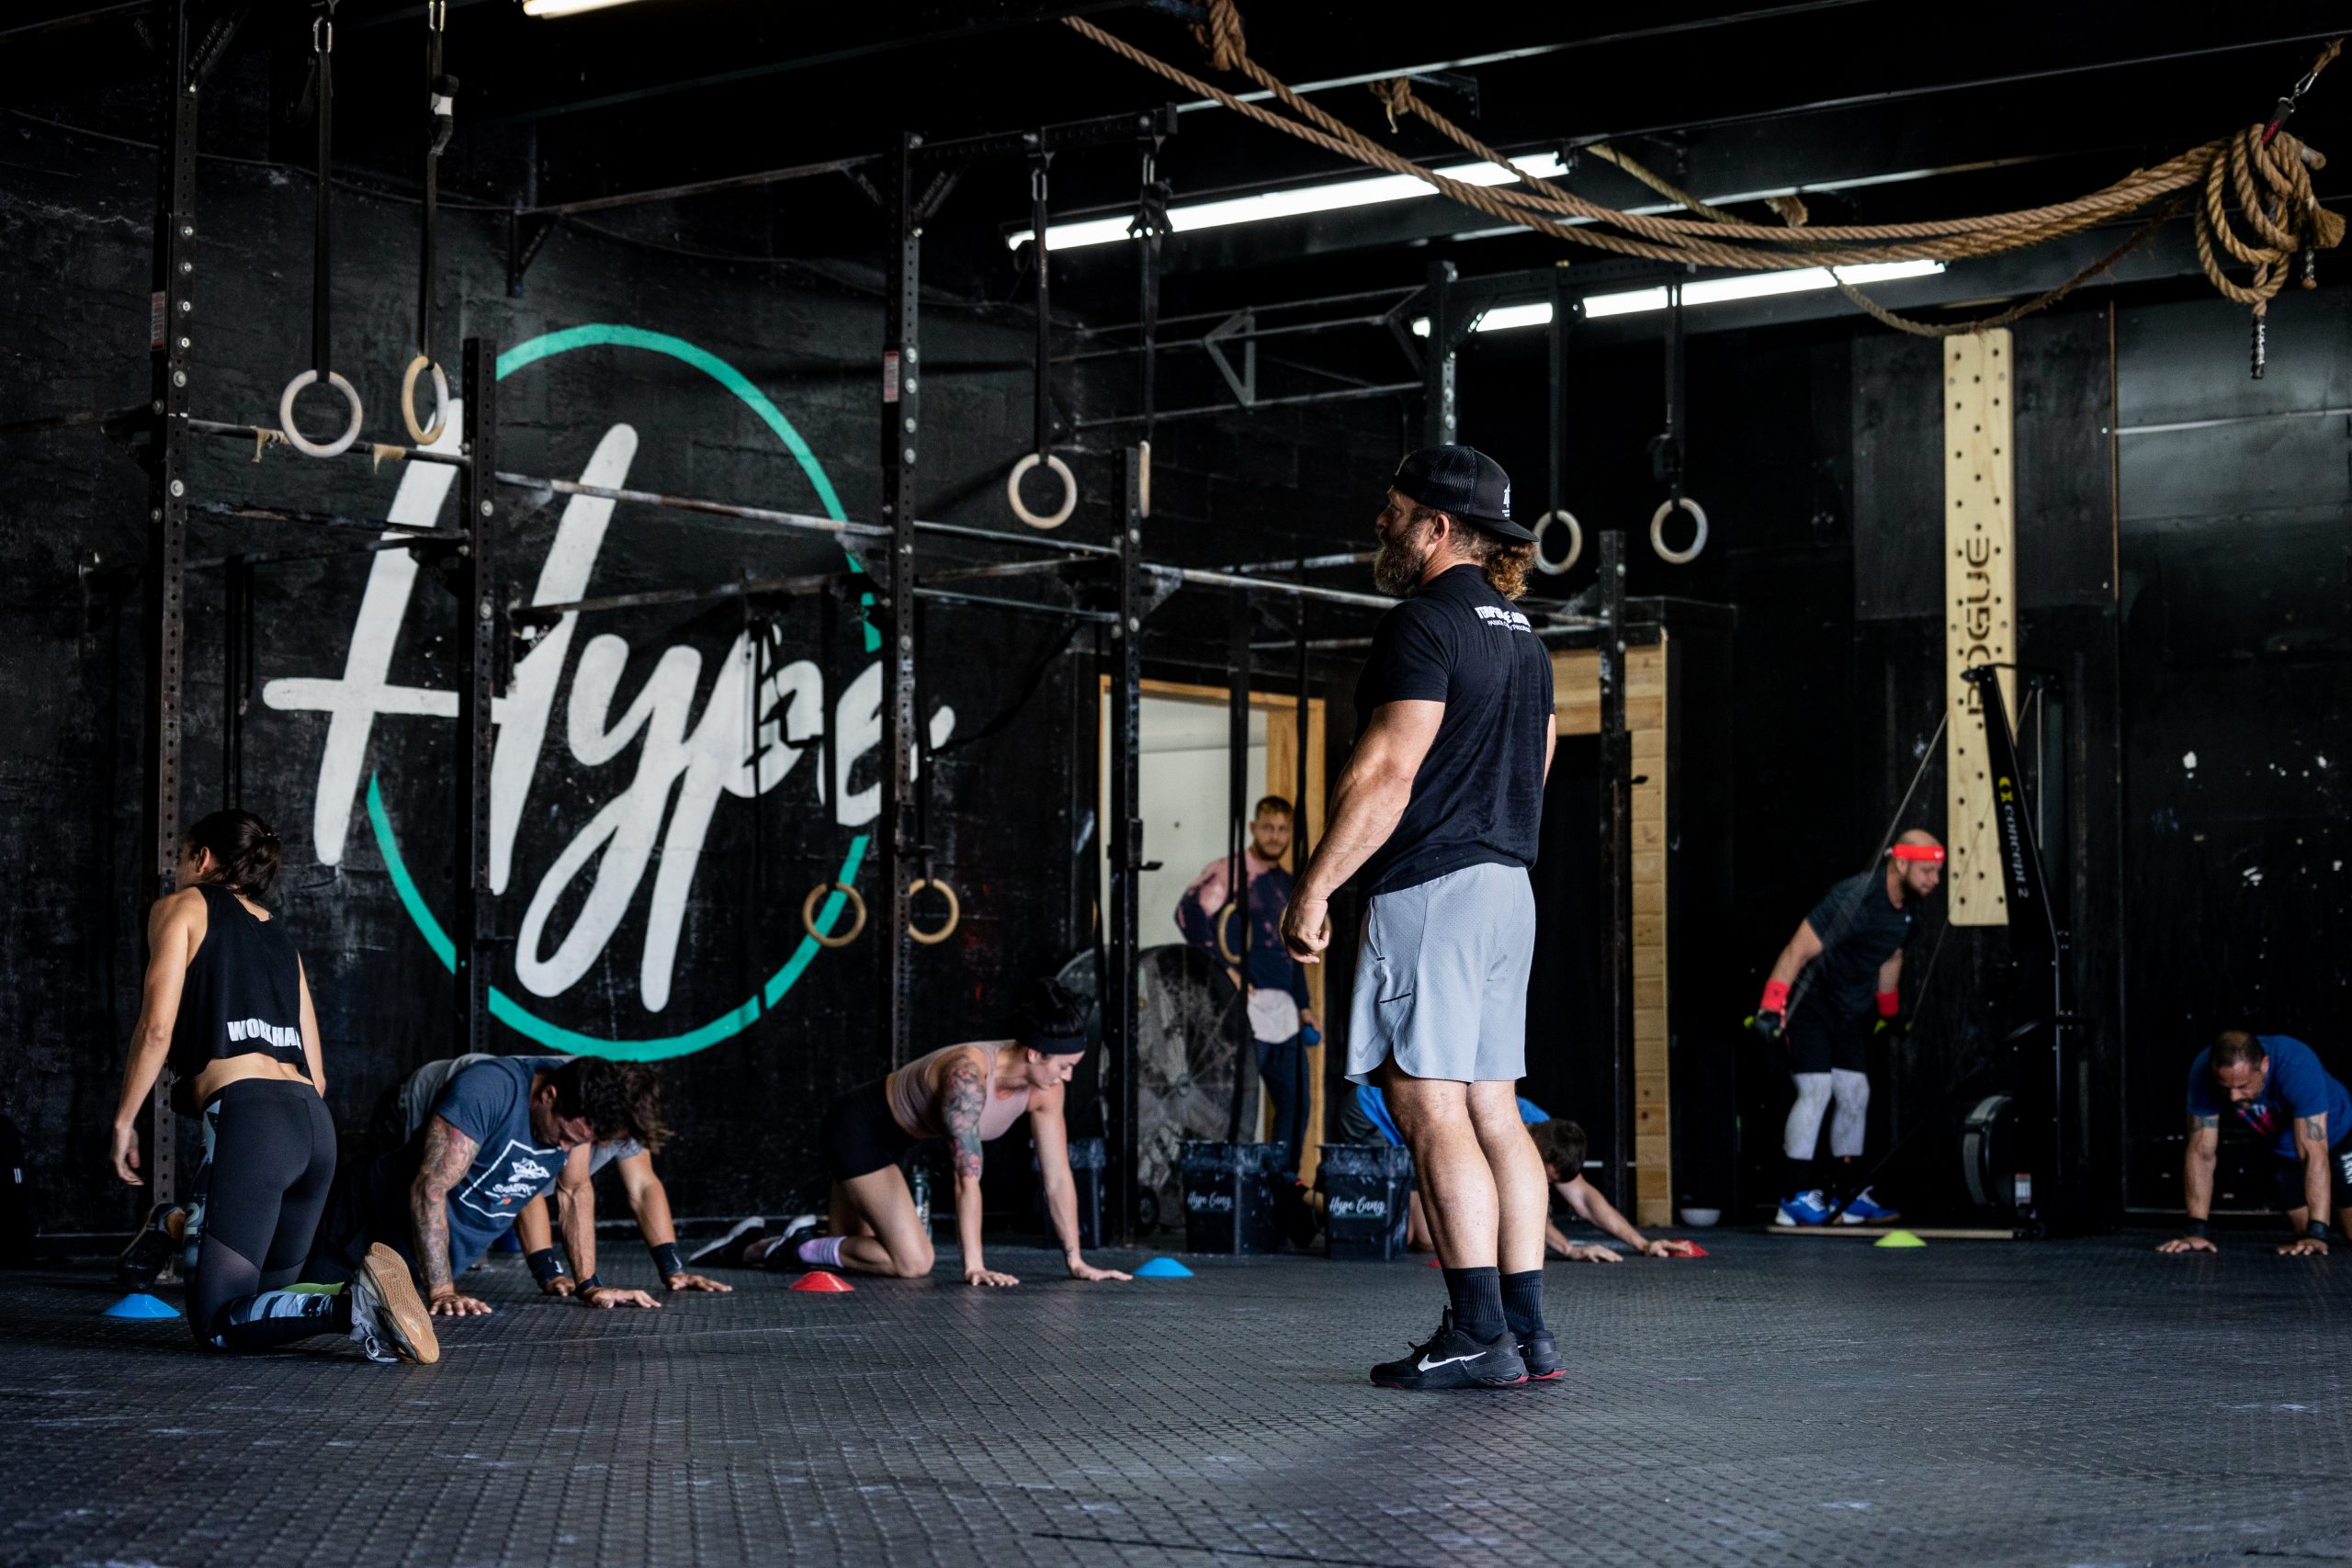 Temperance Training owner, Anthony Fazio watches over his student during a CrossFit class in Boca Raton, Fl.